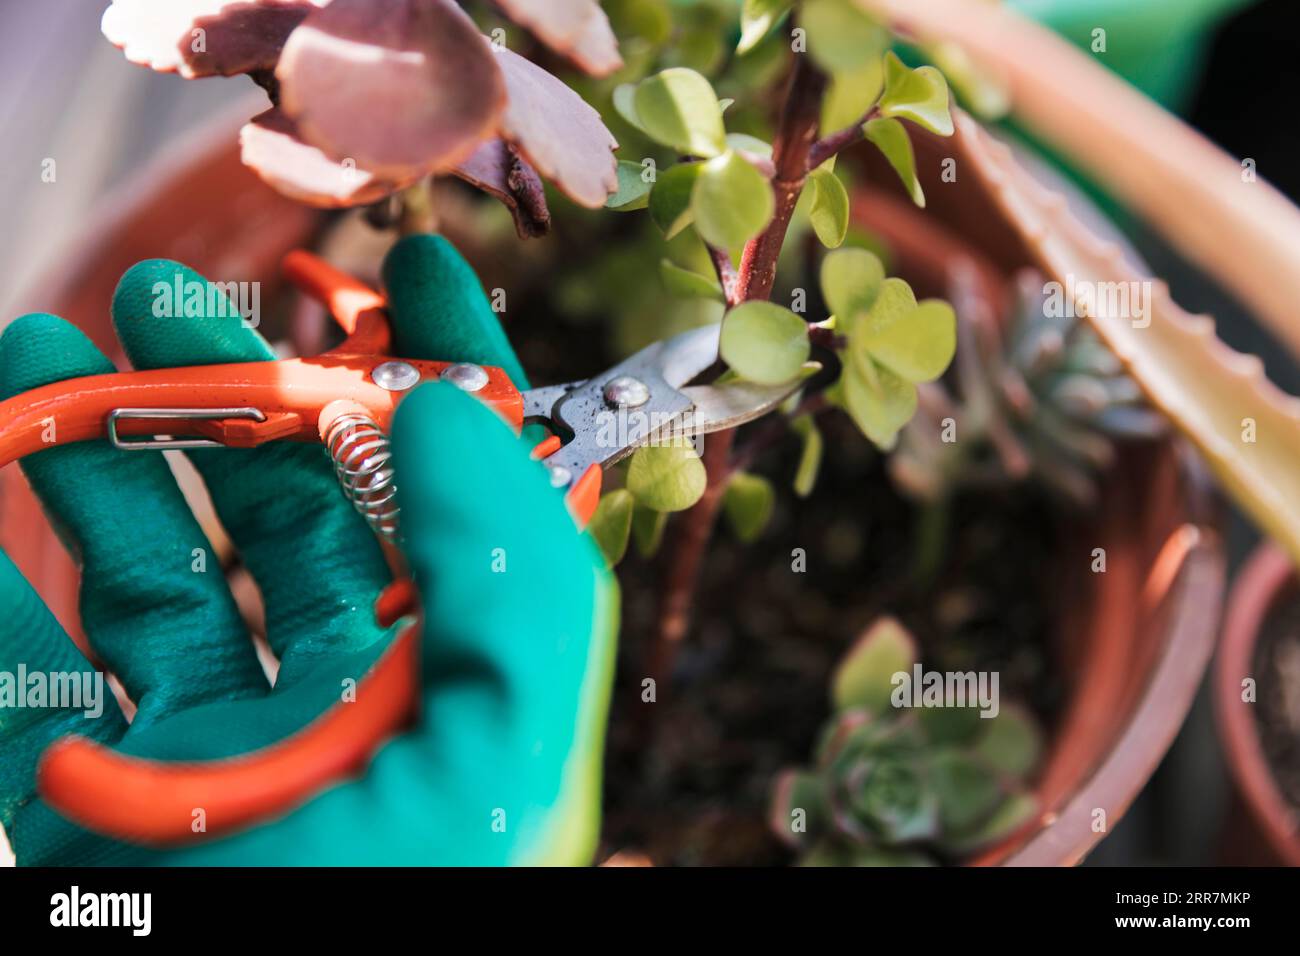 Gardener s cutting plant twig with secateurs Stock Photo